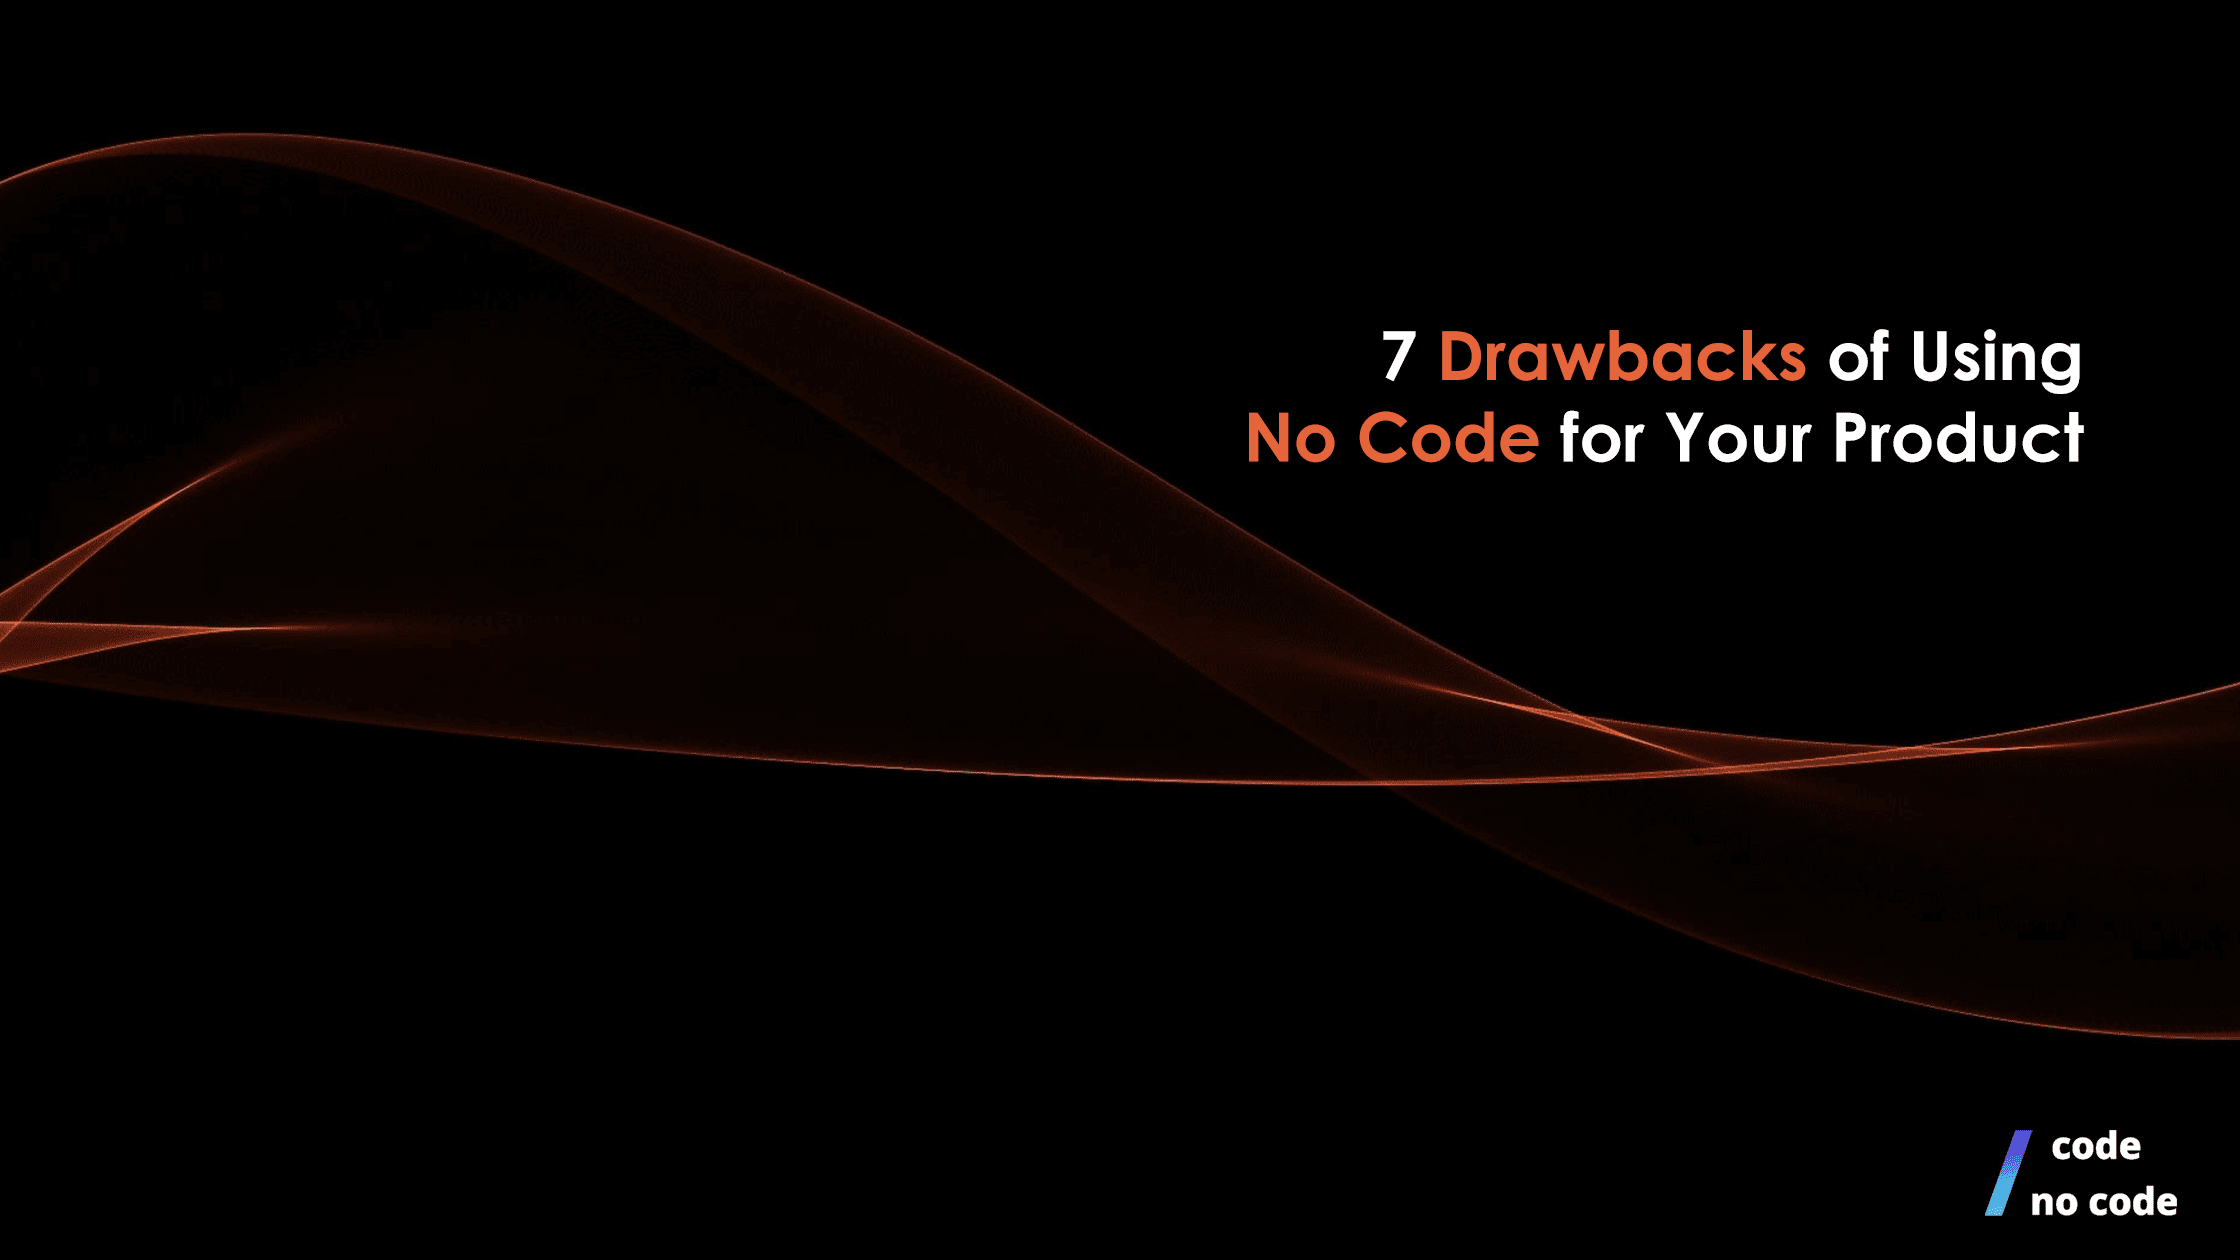 7 Drawbacks of Using No Code for Your Product